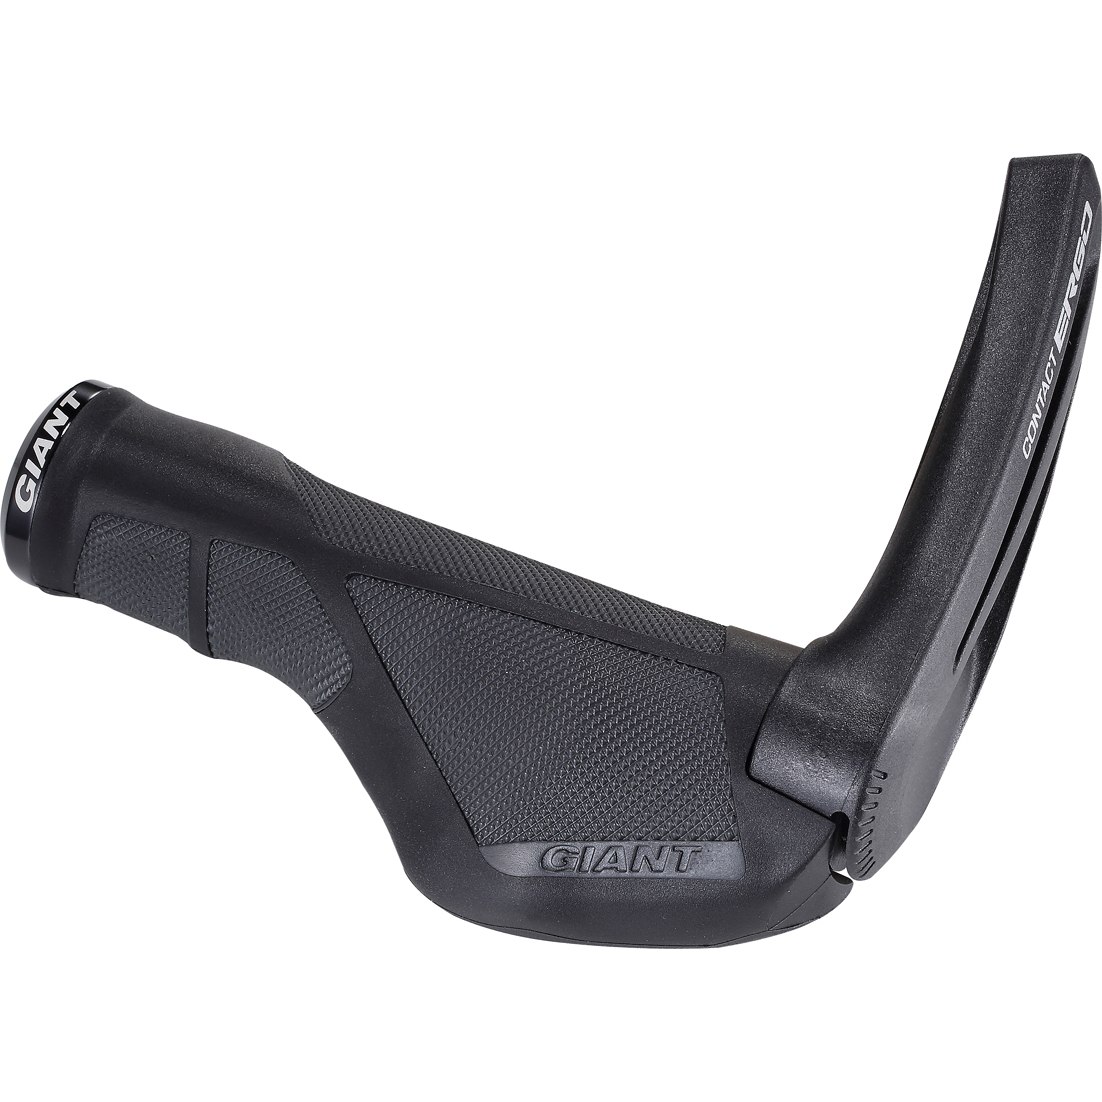 Image of Giant Connect Ergo Max Plus Grips - black/gray